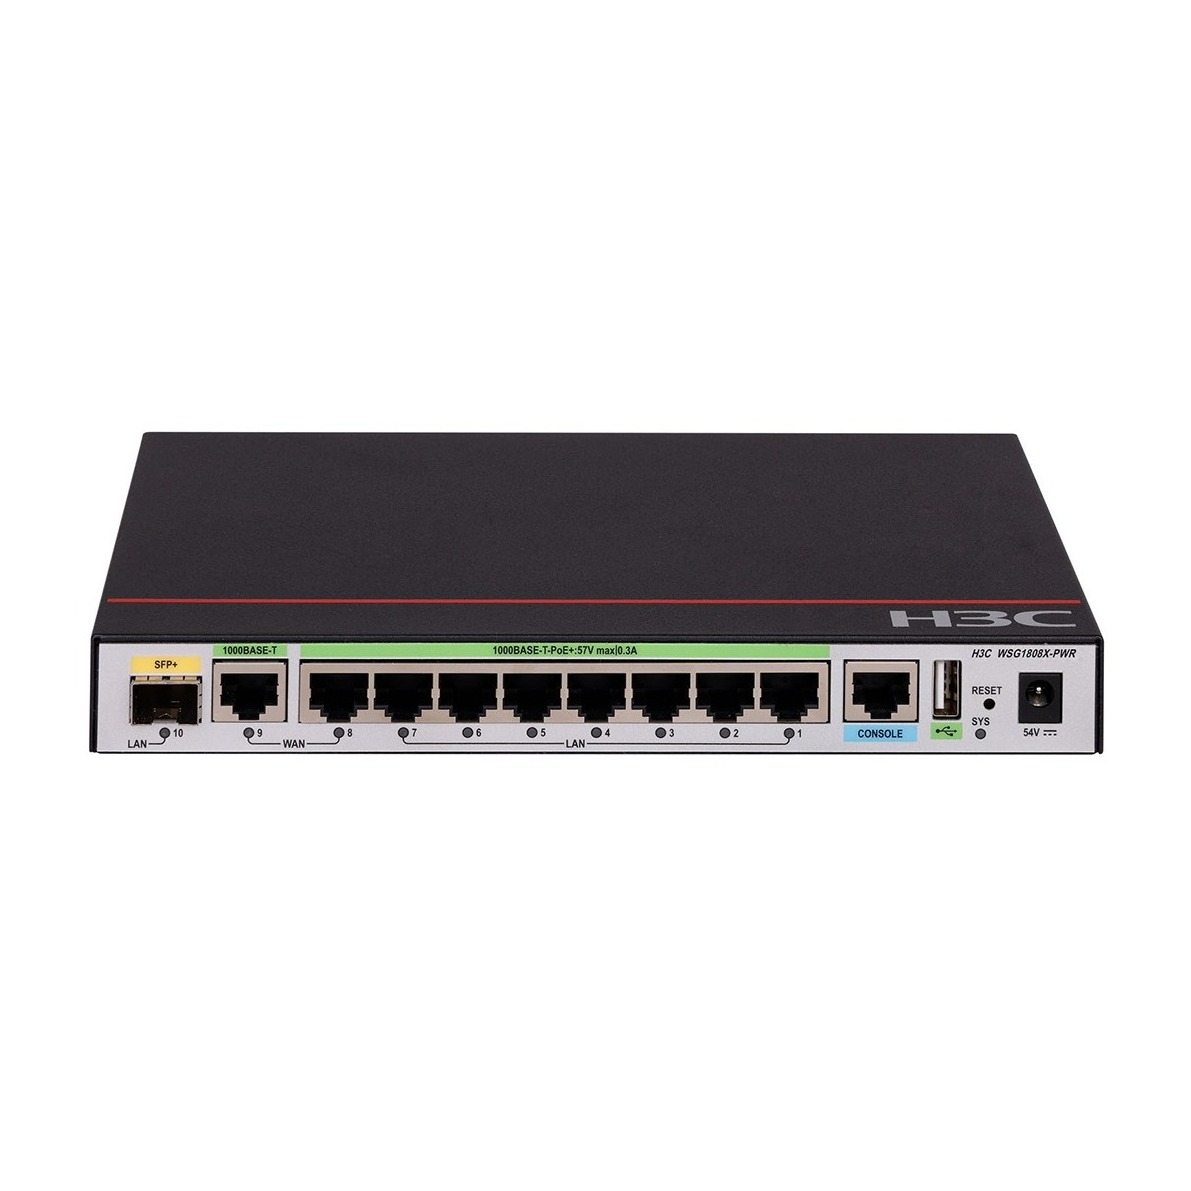 H3C WSG1808X-PWR (9801A5NN), 9 Port Giga (7 port PoE+) with 1 x 10 SFP+ Wireless Integrated Services Gateway